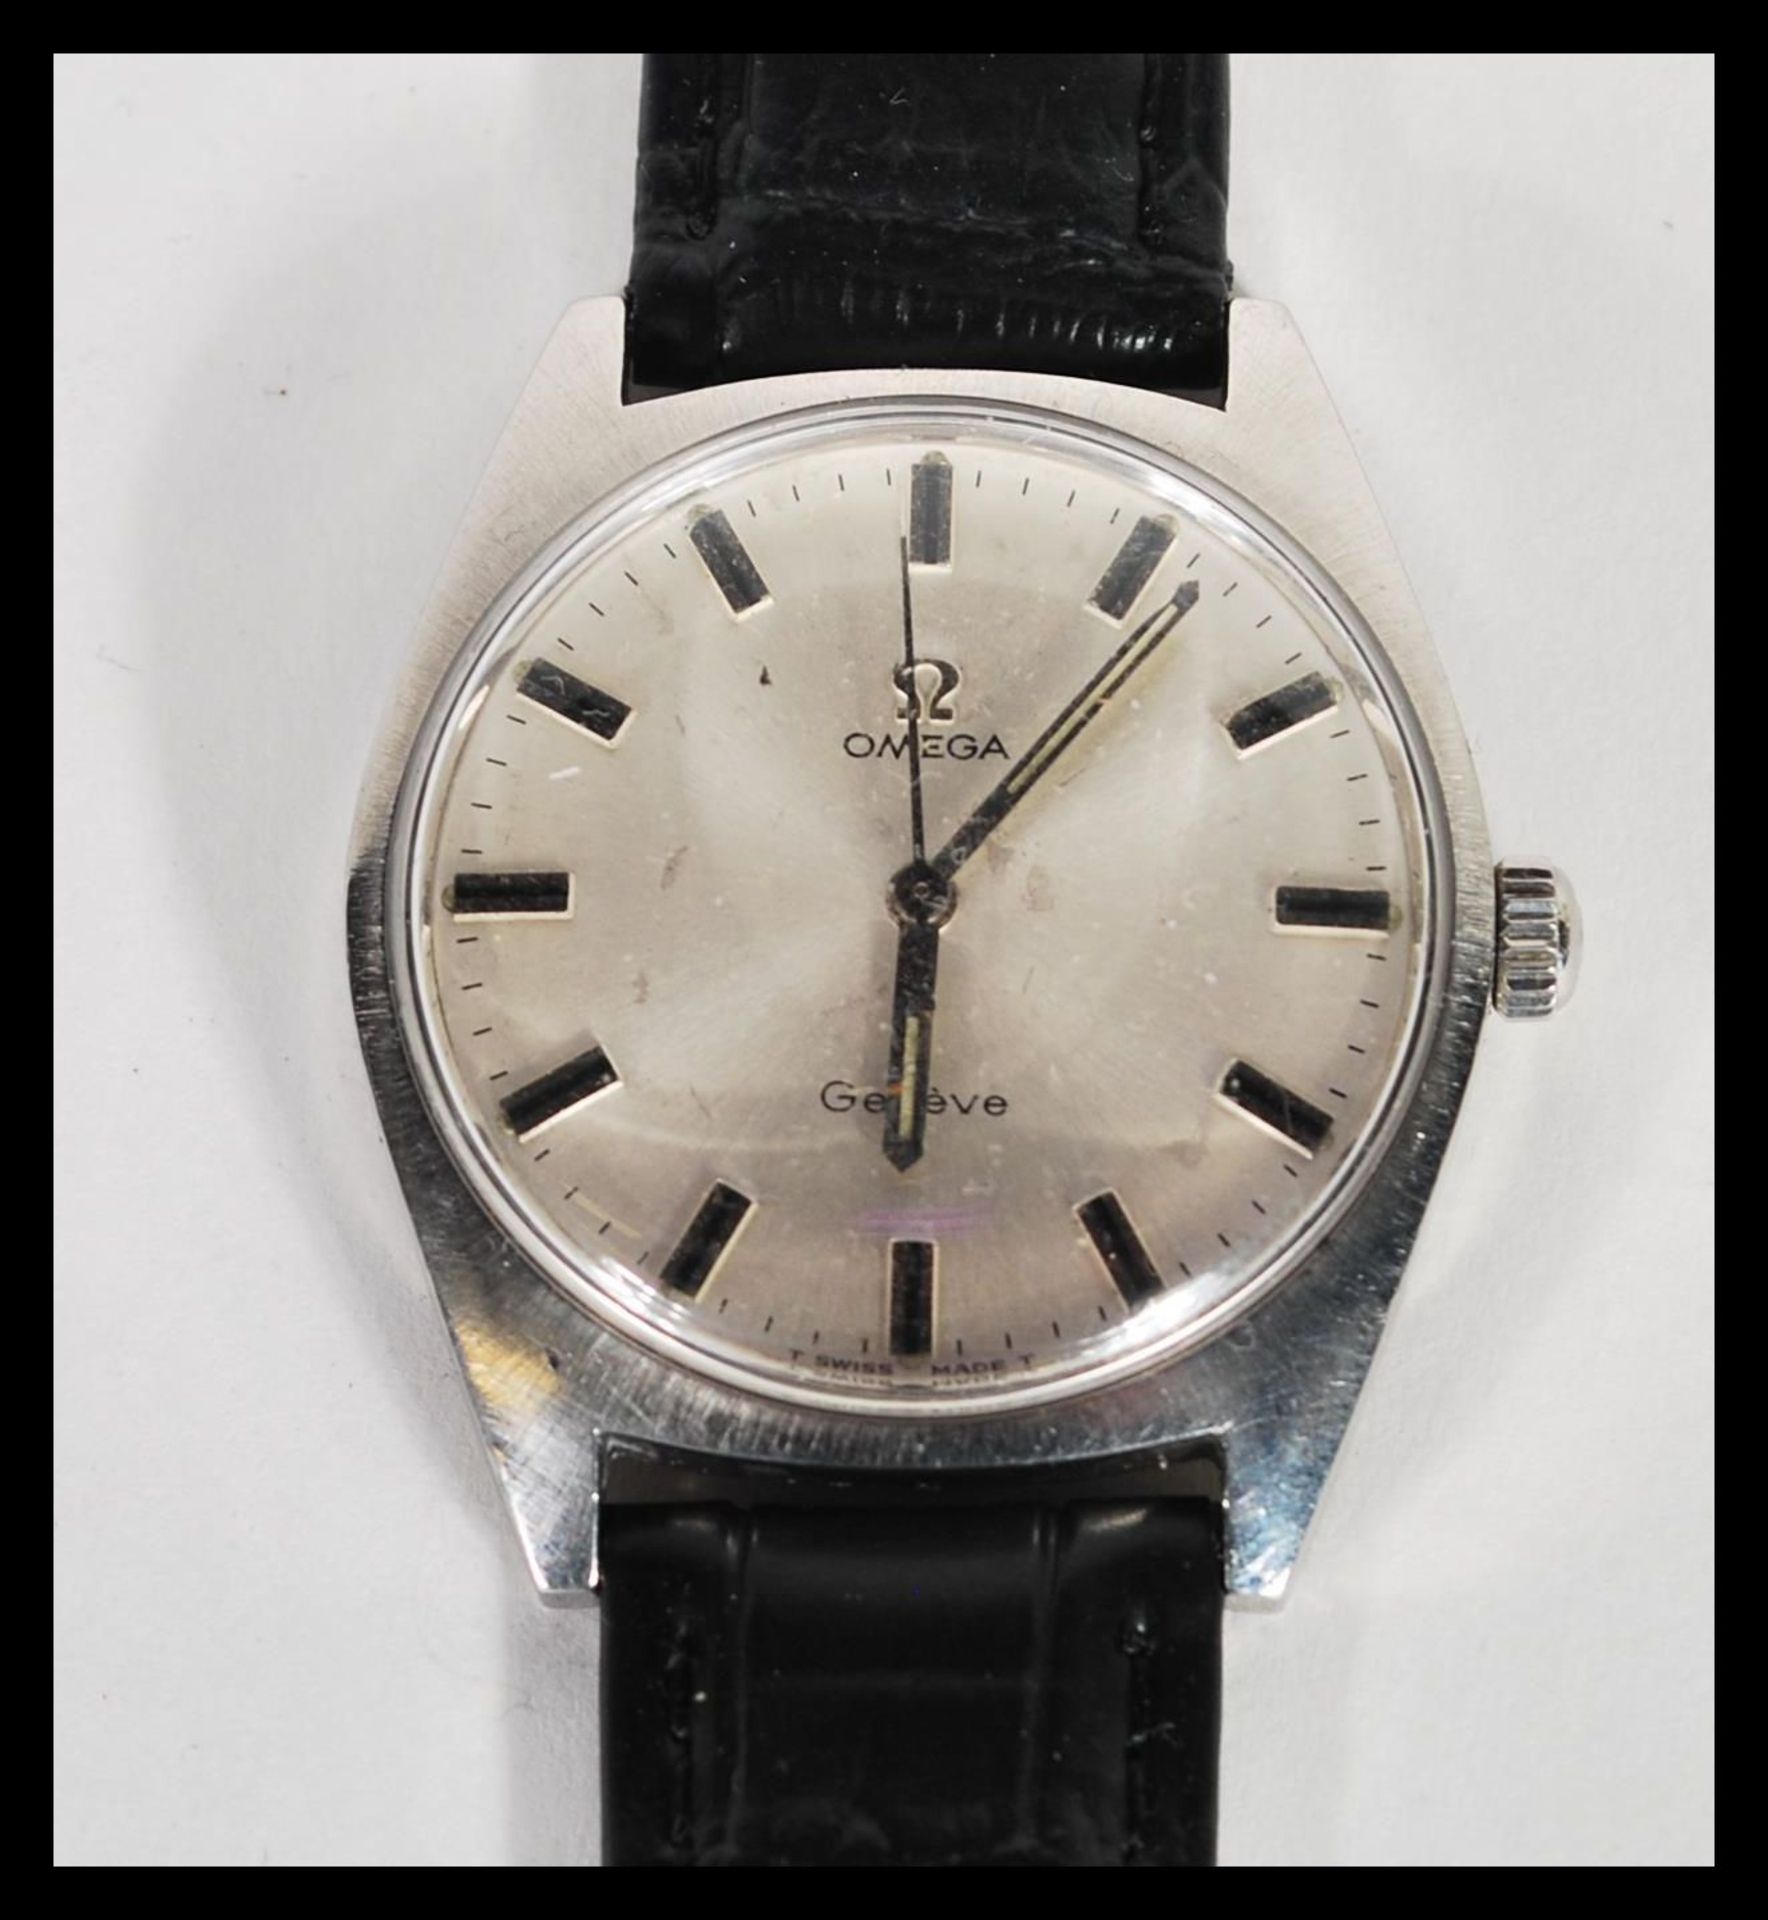 A vintage Omega Geneve waterproof watch having a silvered dial with silver baton numerals and